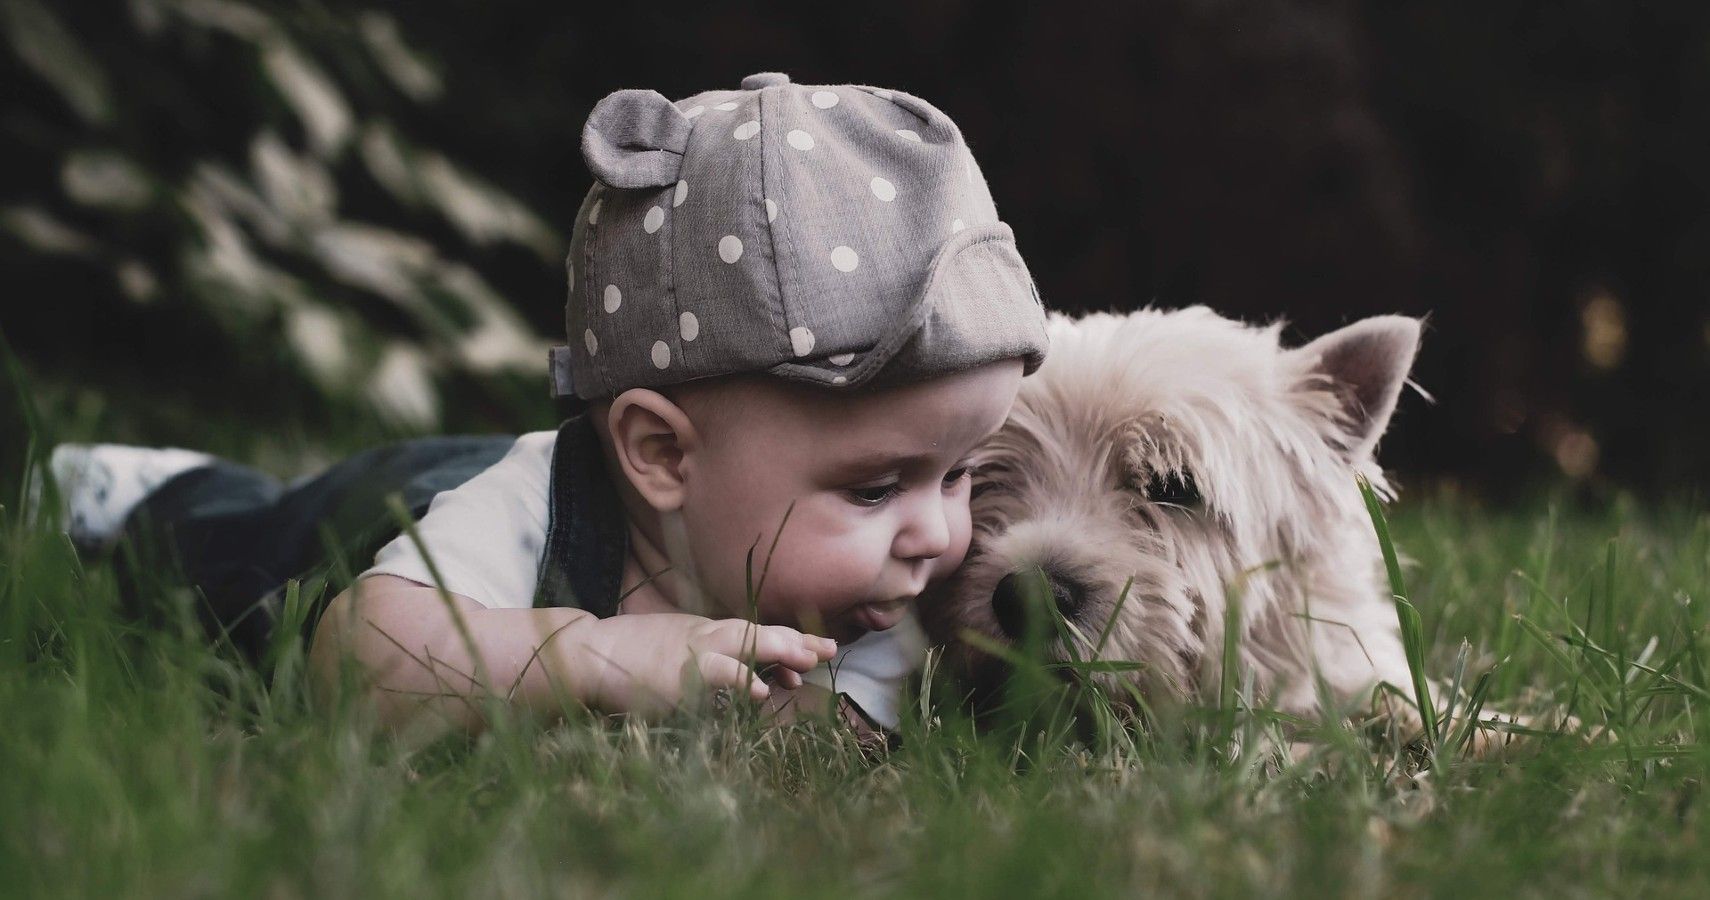 Toddler and dog in the grass